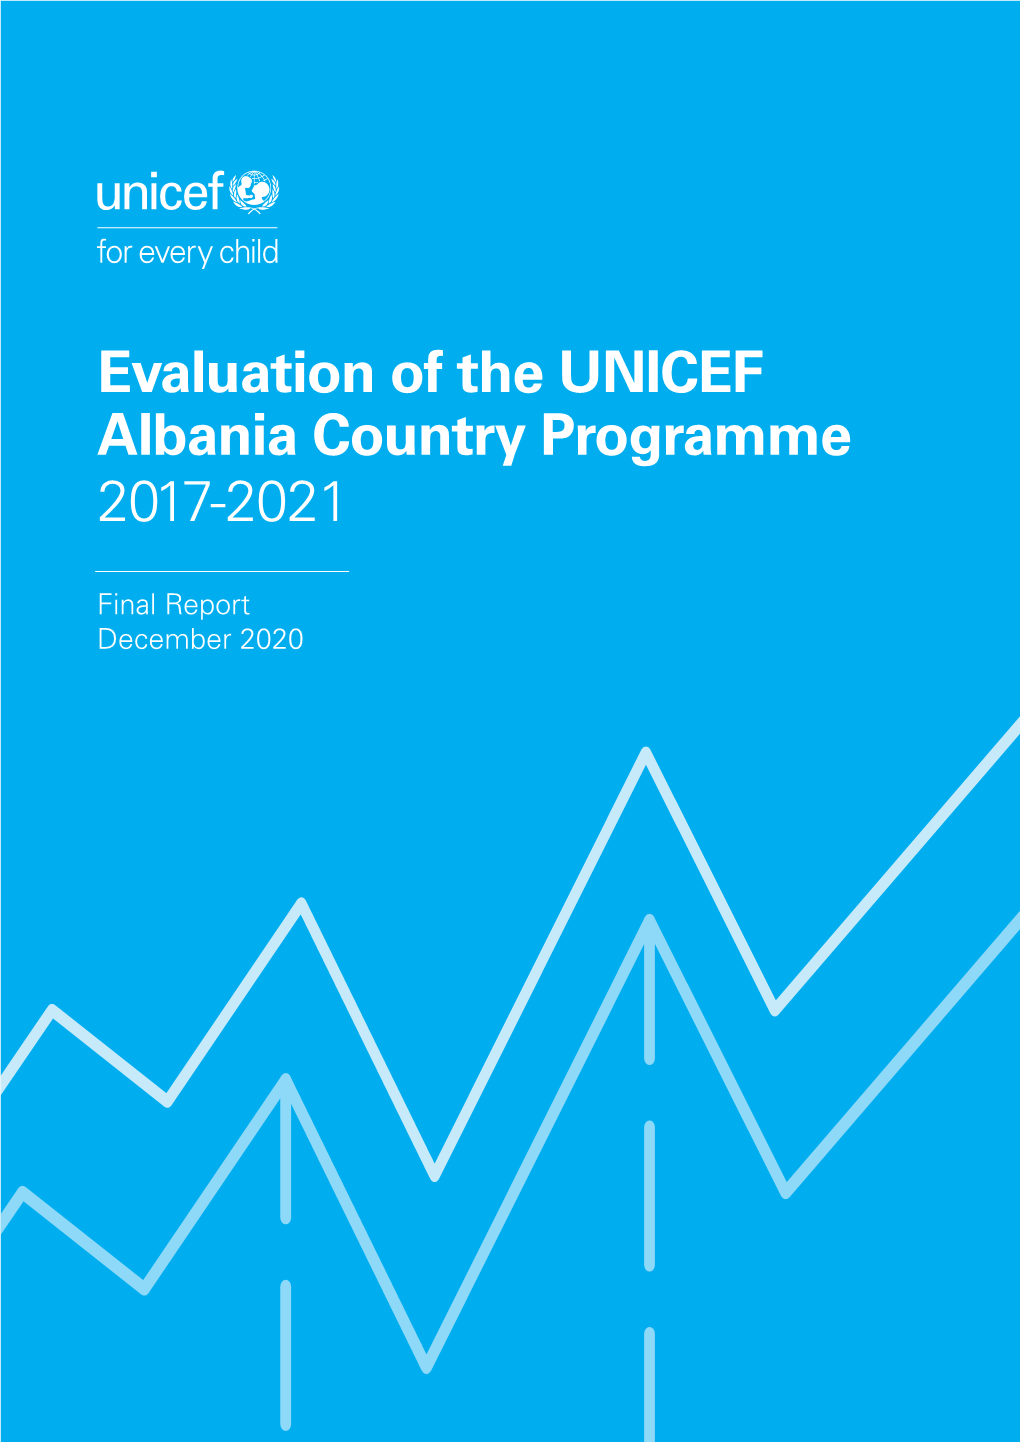 Evaluation of the UNICEF Albania Country Programme 2017-2021